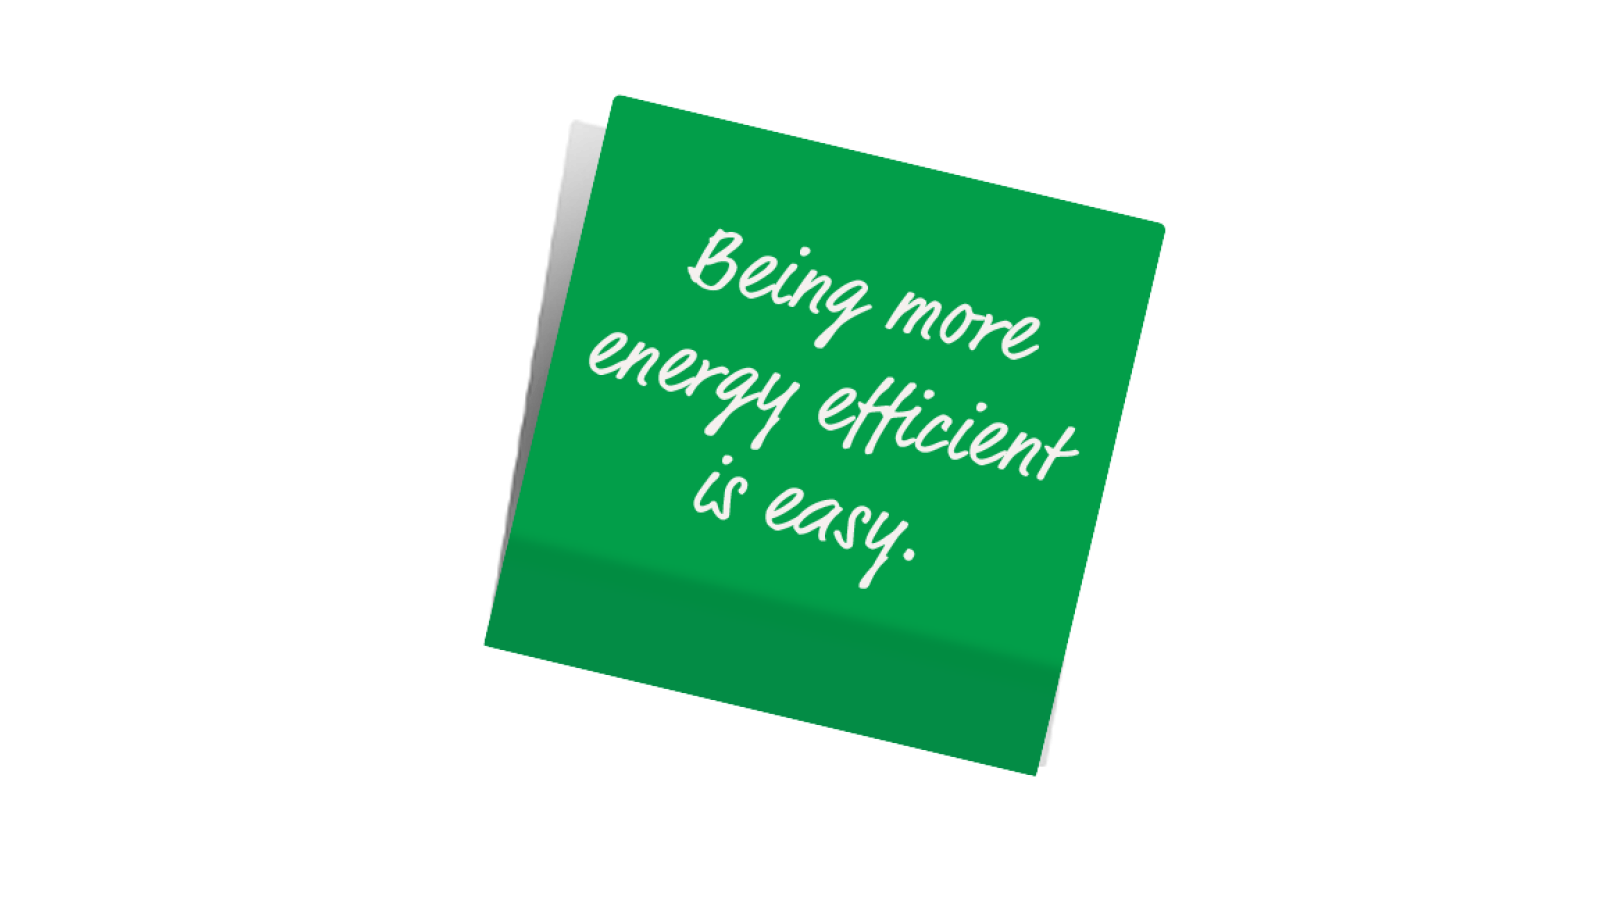 green sticky note reading "Being more energy efficient is easy"